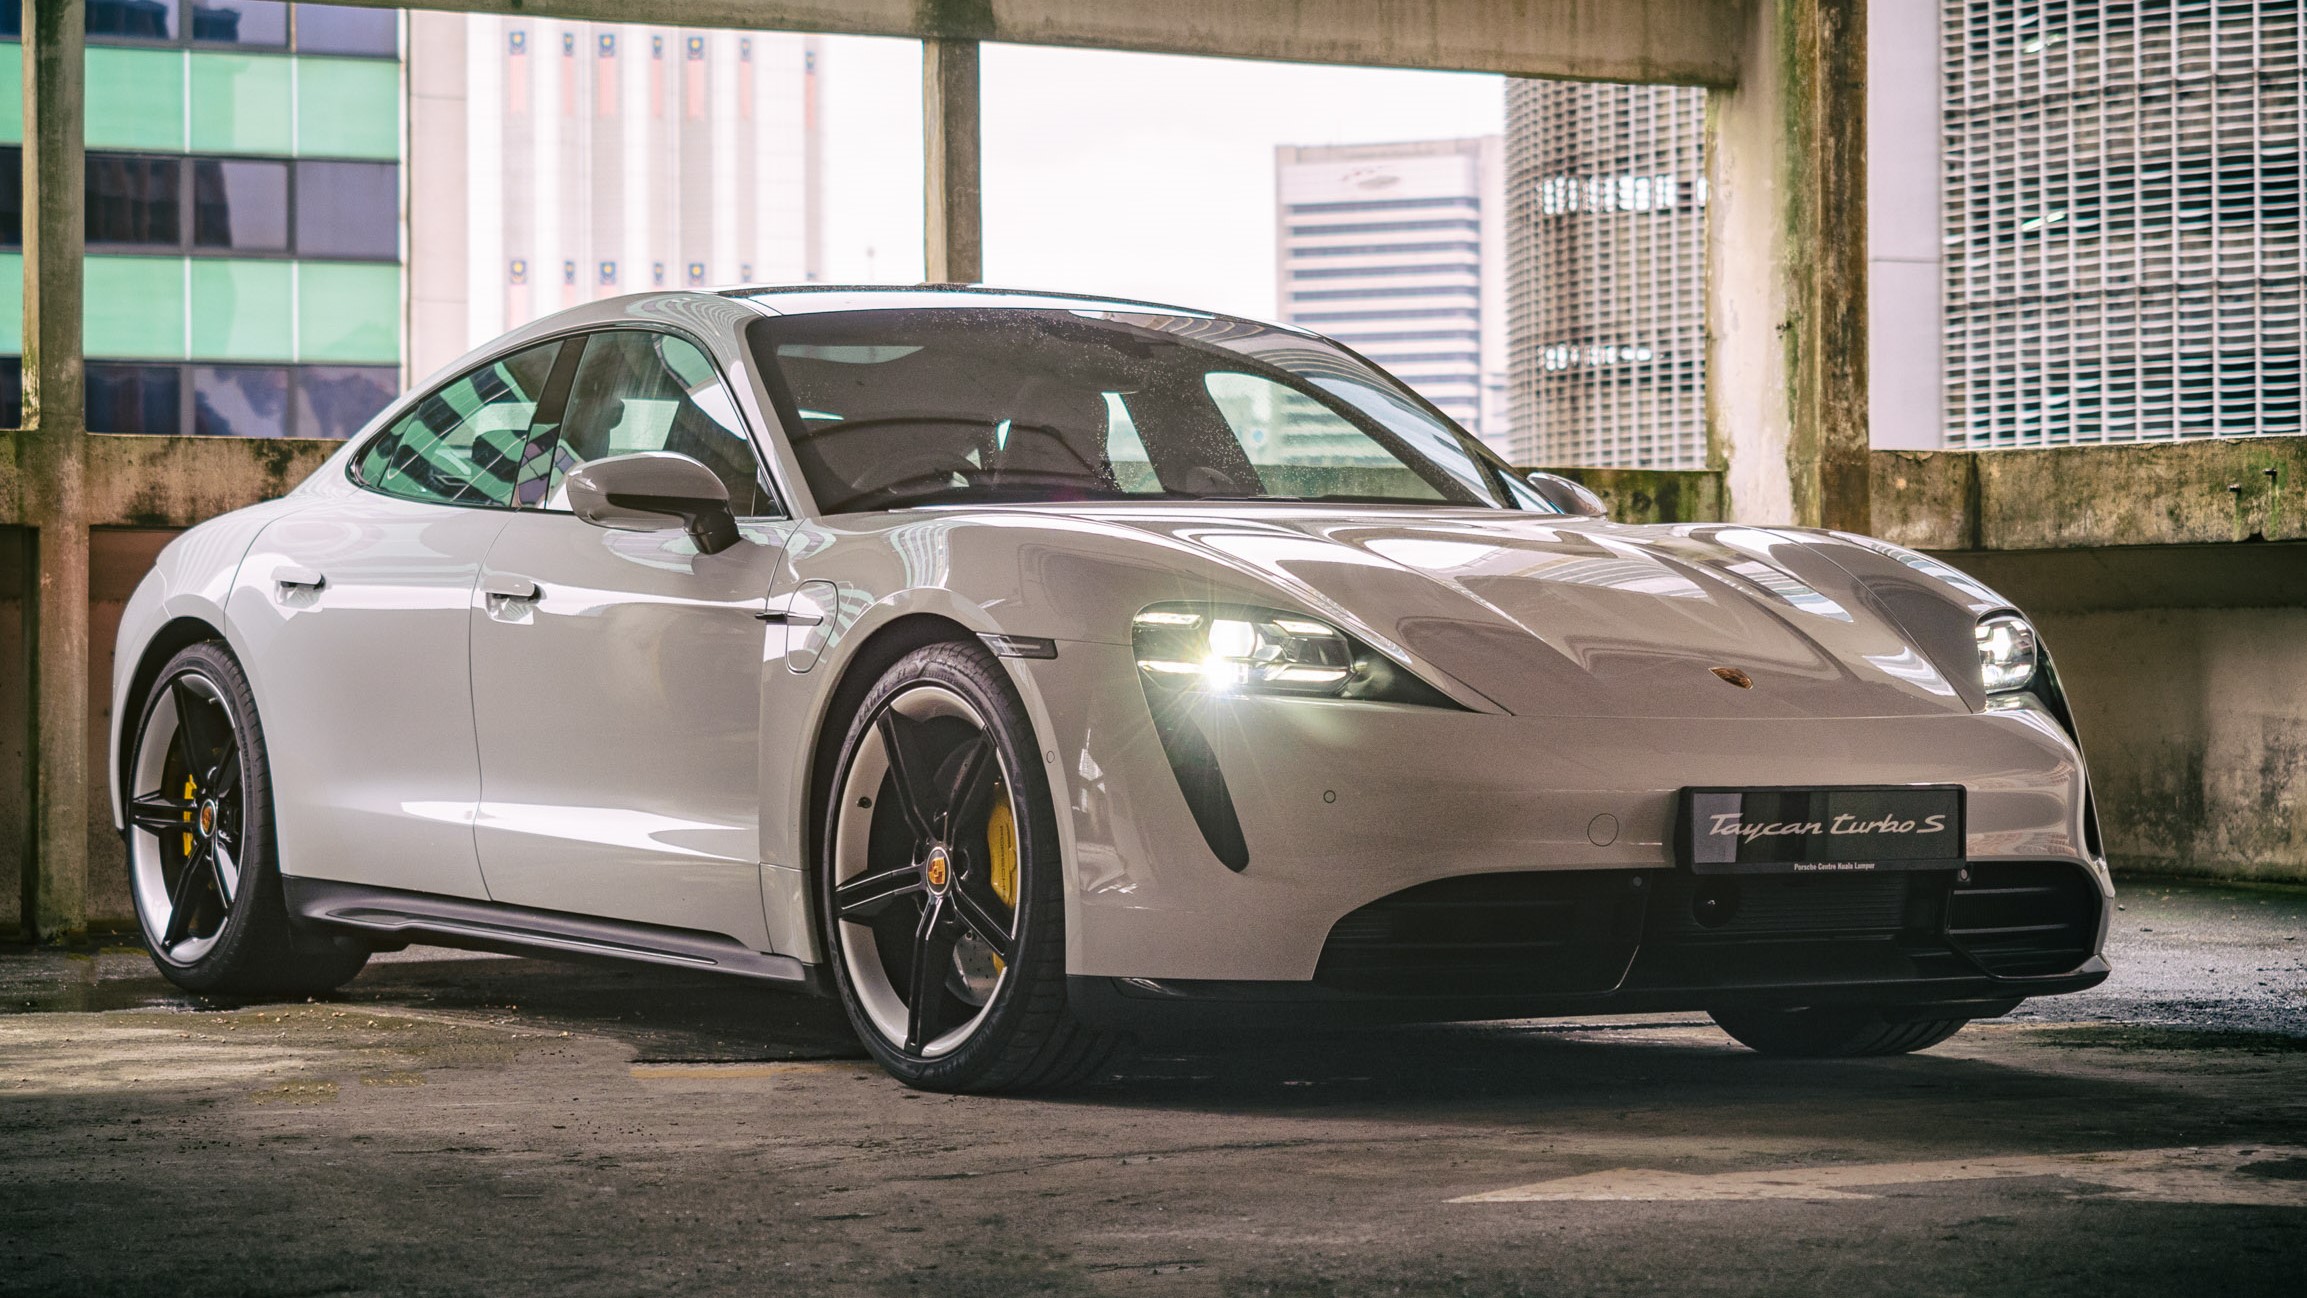 You can now purchase a Porsche Taycan in Malaysia from only RM725,000